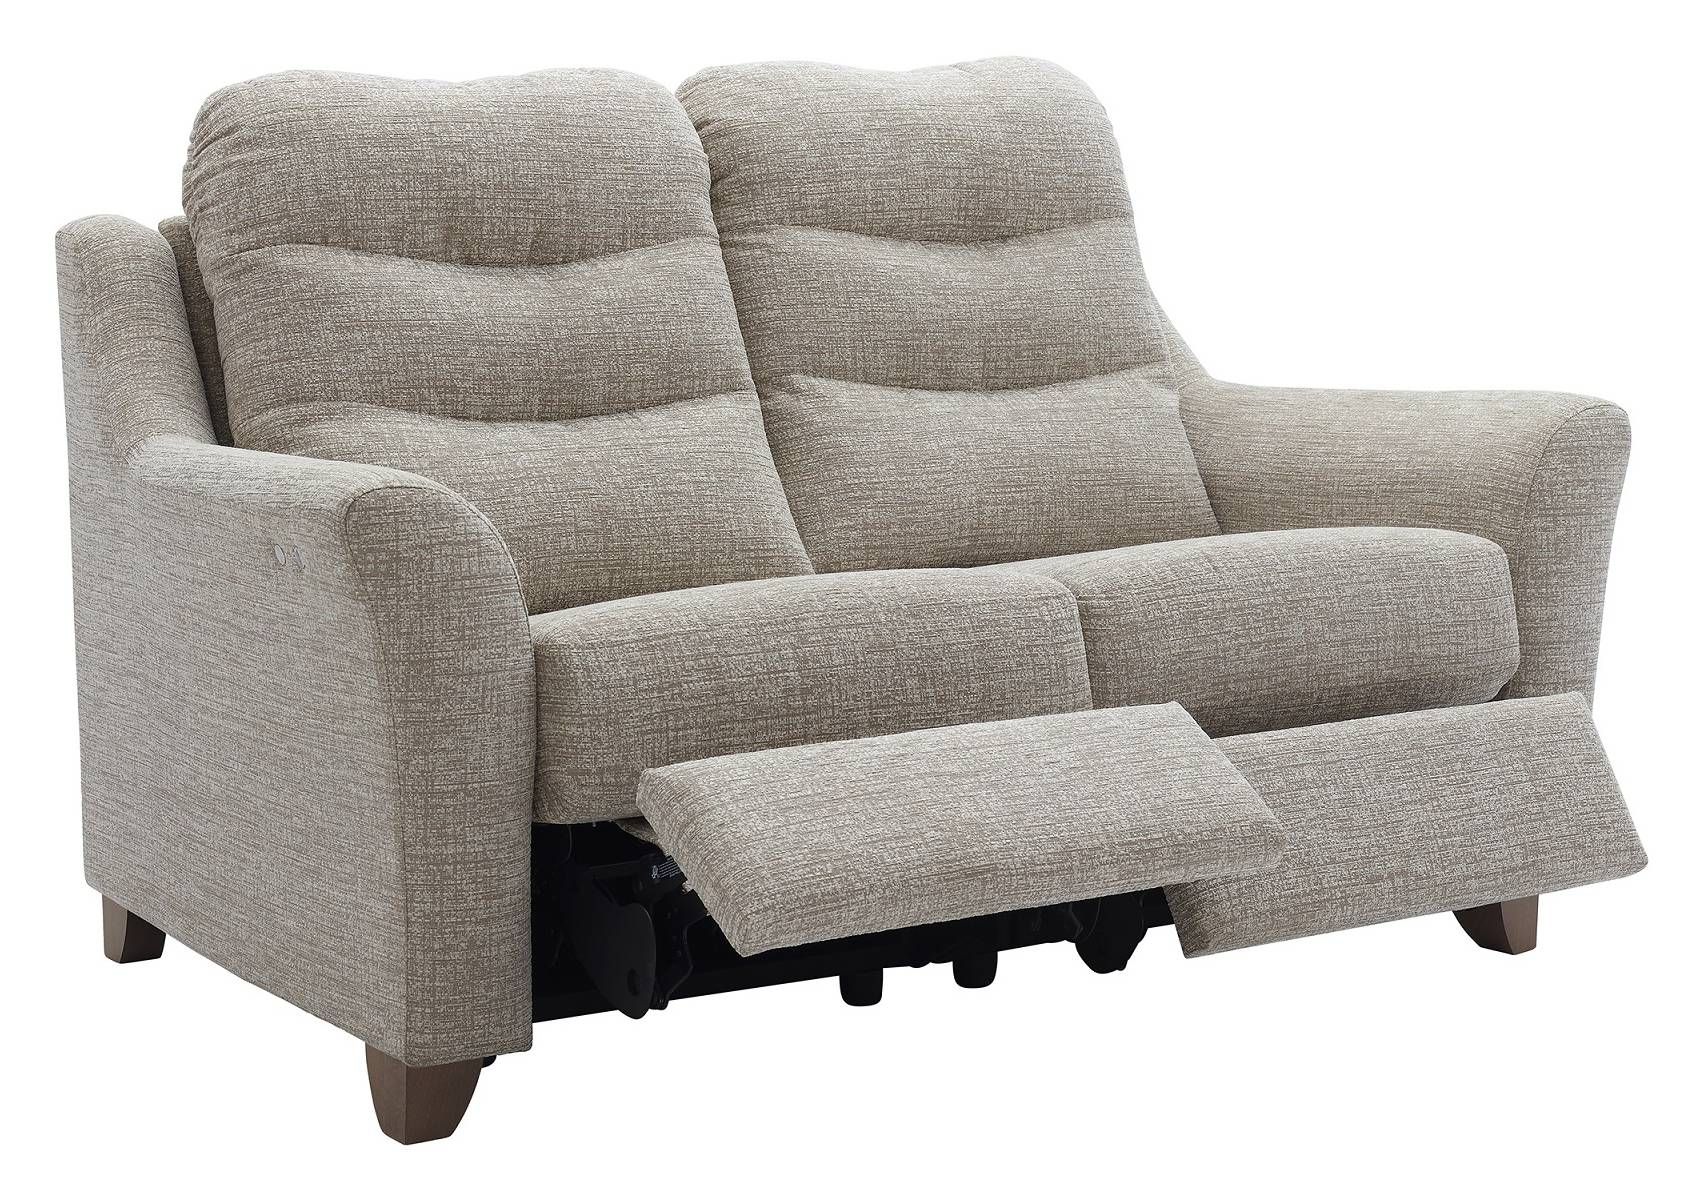 G Plan Tate Fixed & Recliner Sofa |Oldrids & Downtown With Tate Ii Sofa Chairs (Photo 11 of 20)